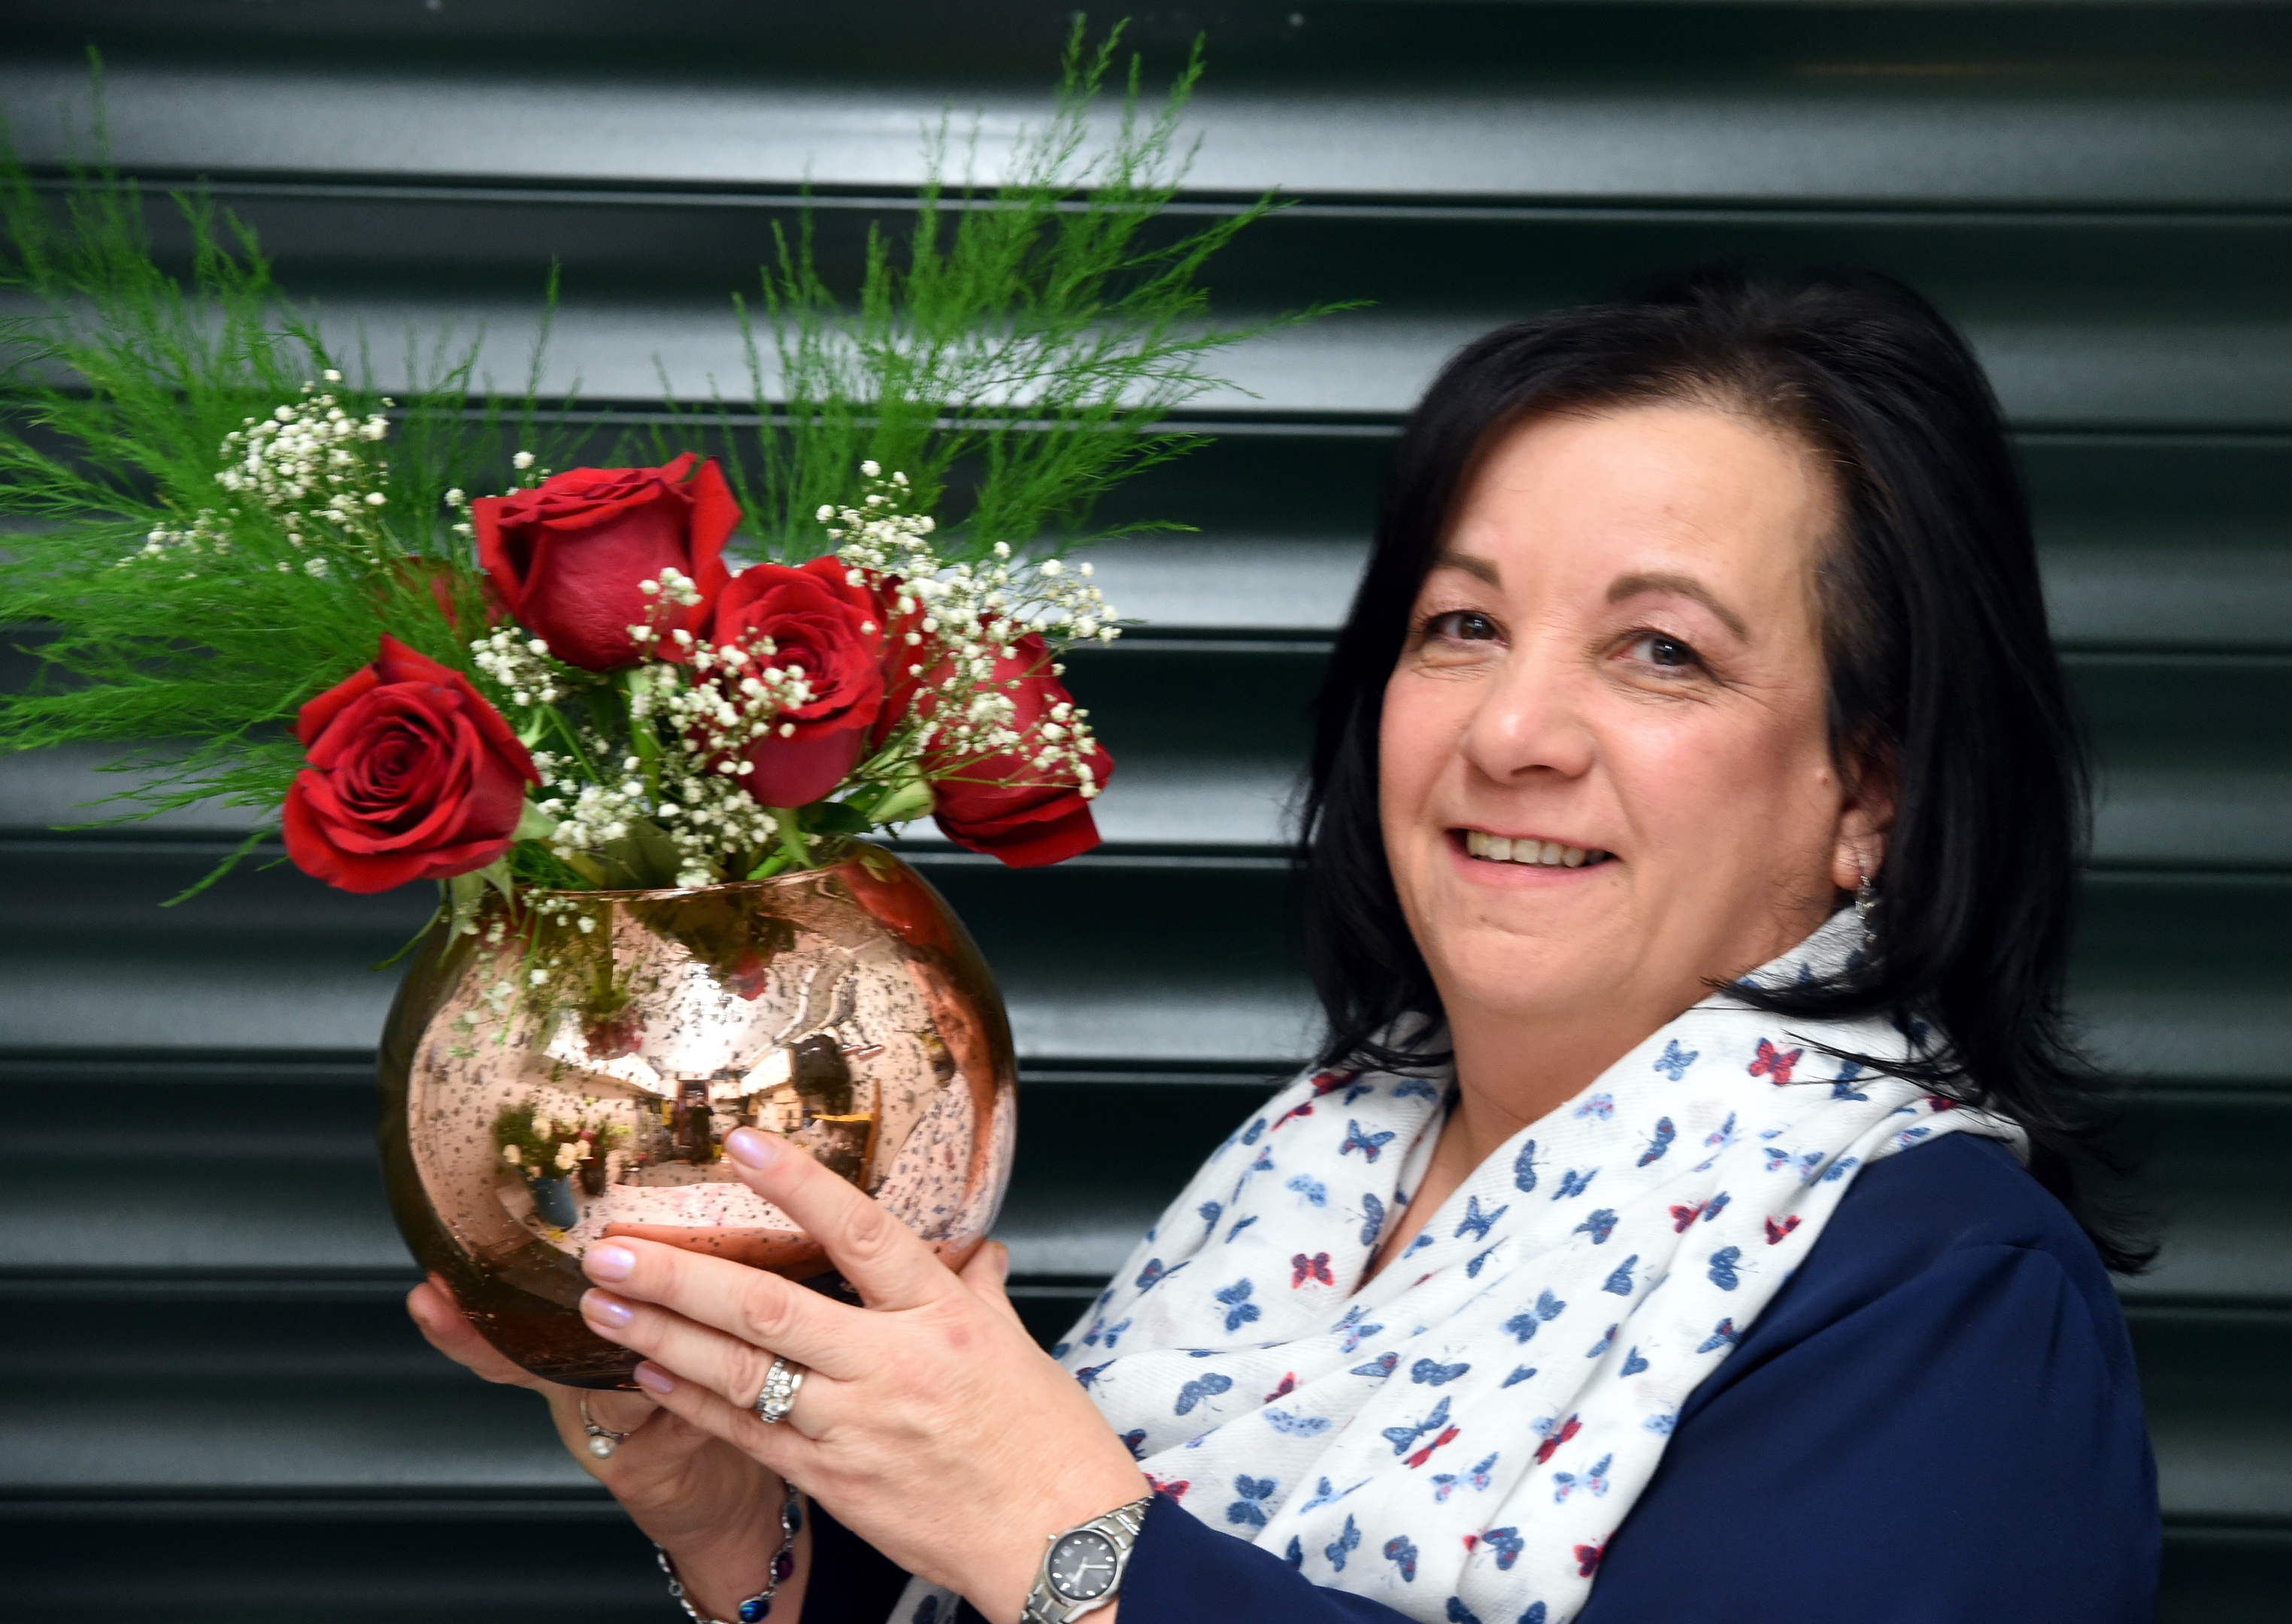 Yvonne Gibson started her new florist business after leaving BP.